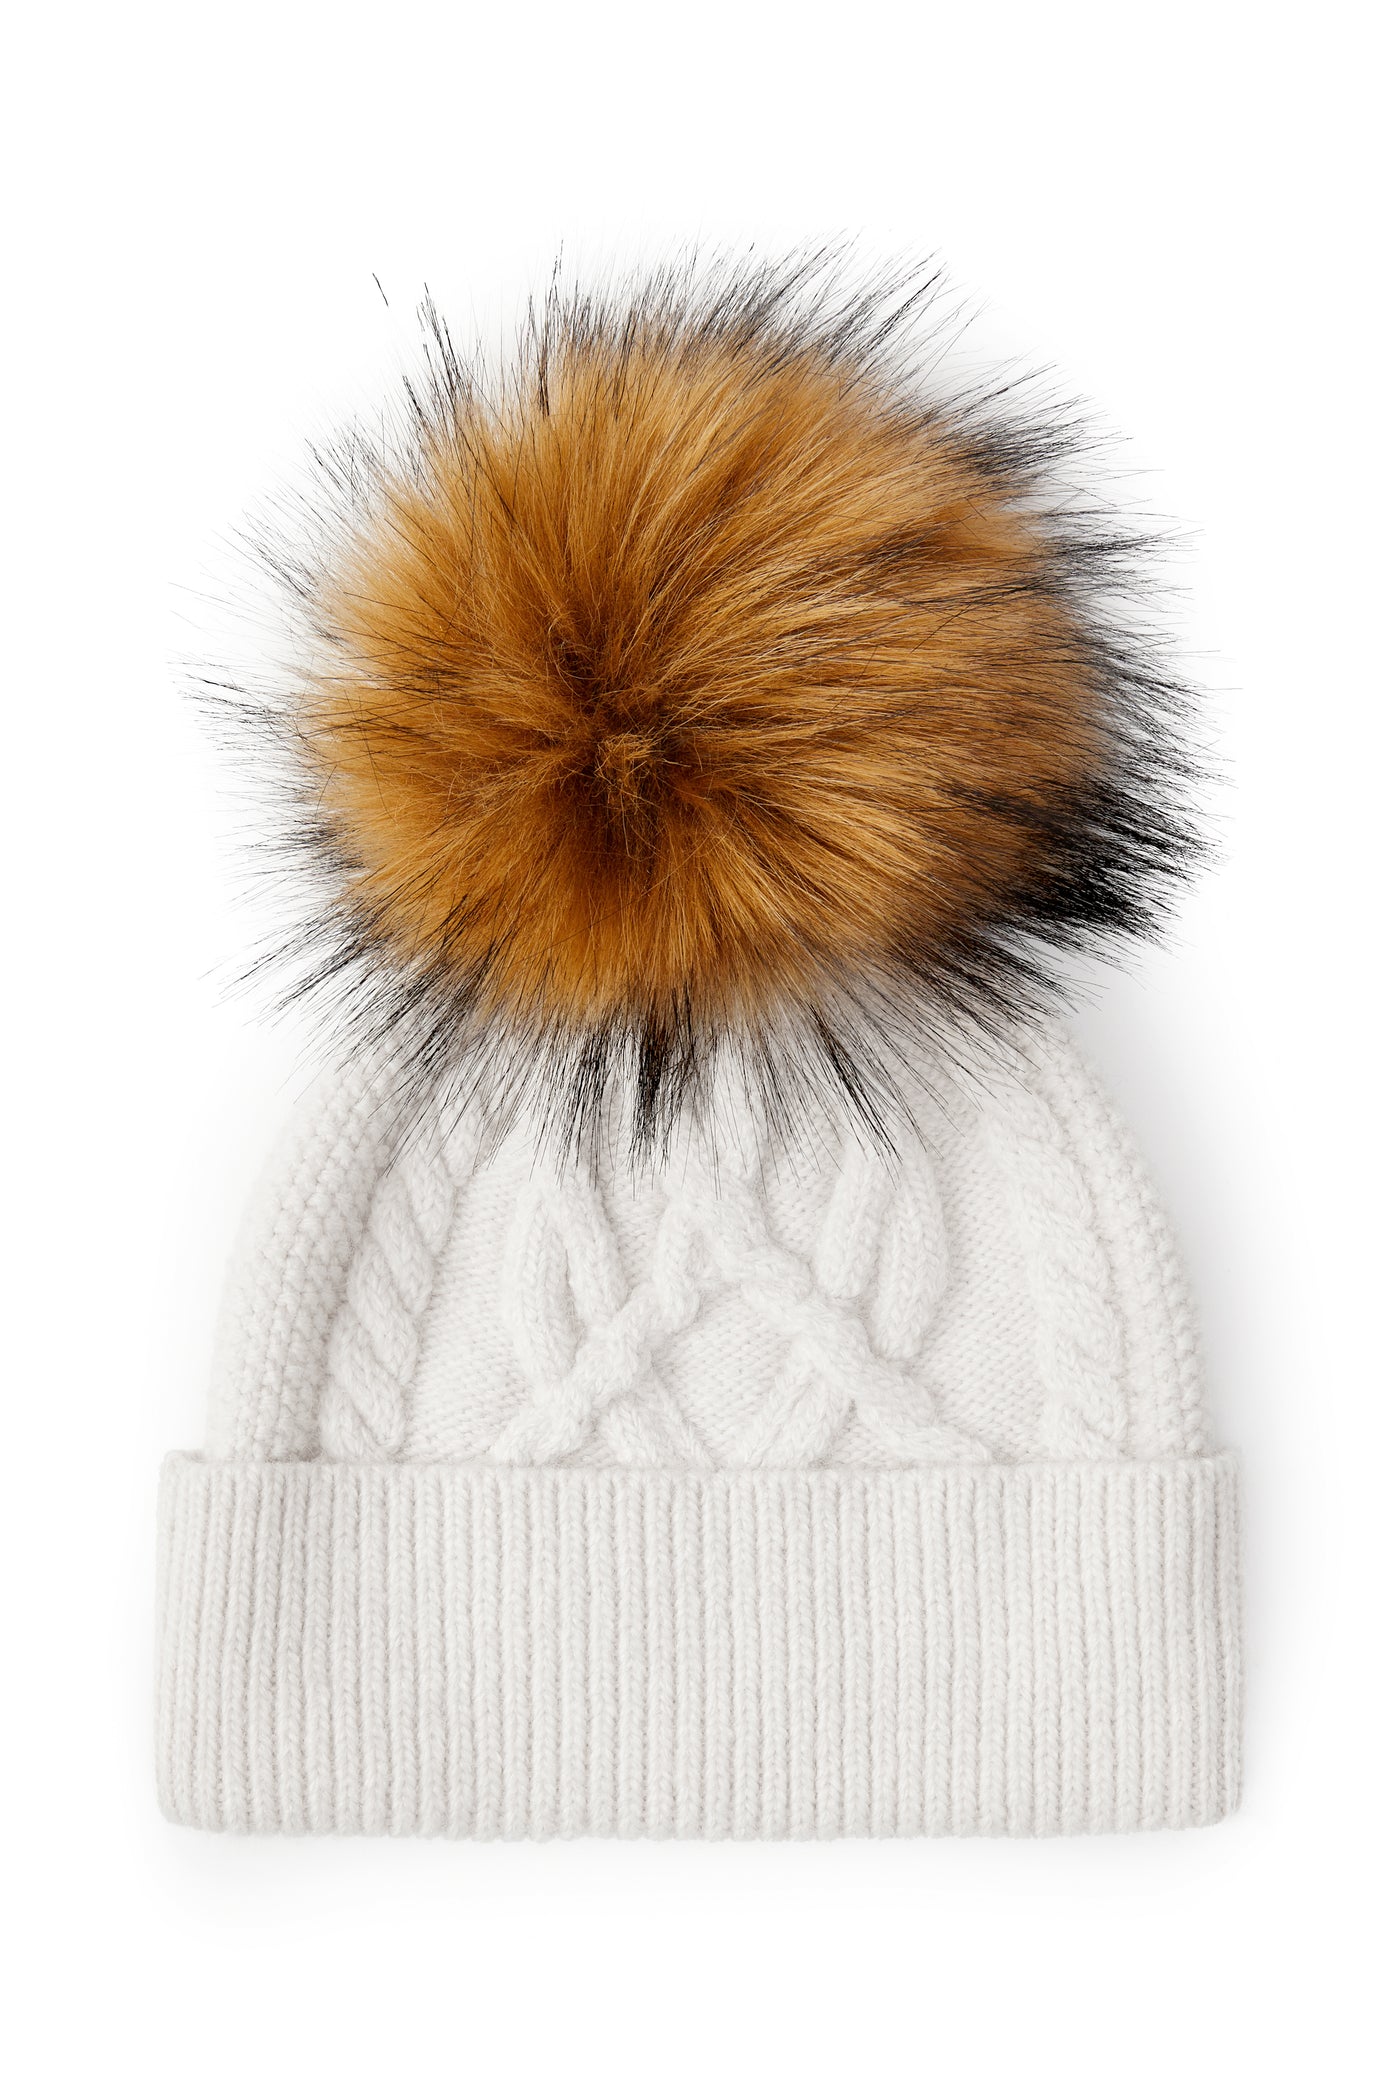 Holland Cooper Cortina Ladies Bobble Hat in Oatmeal Back